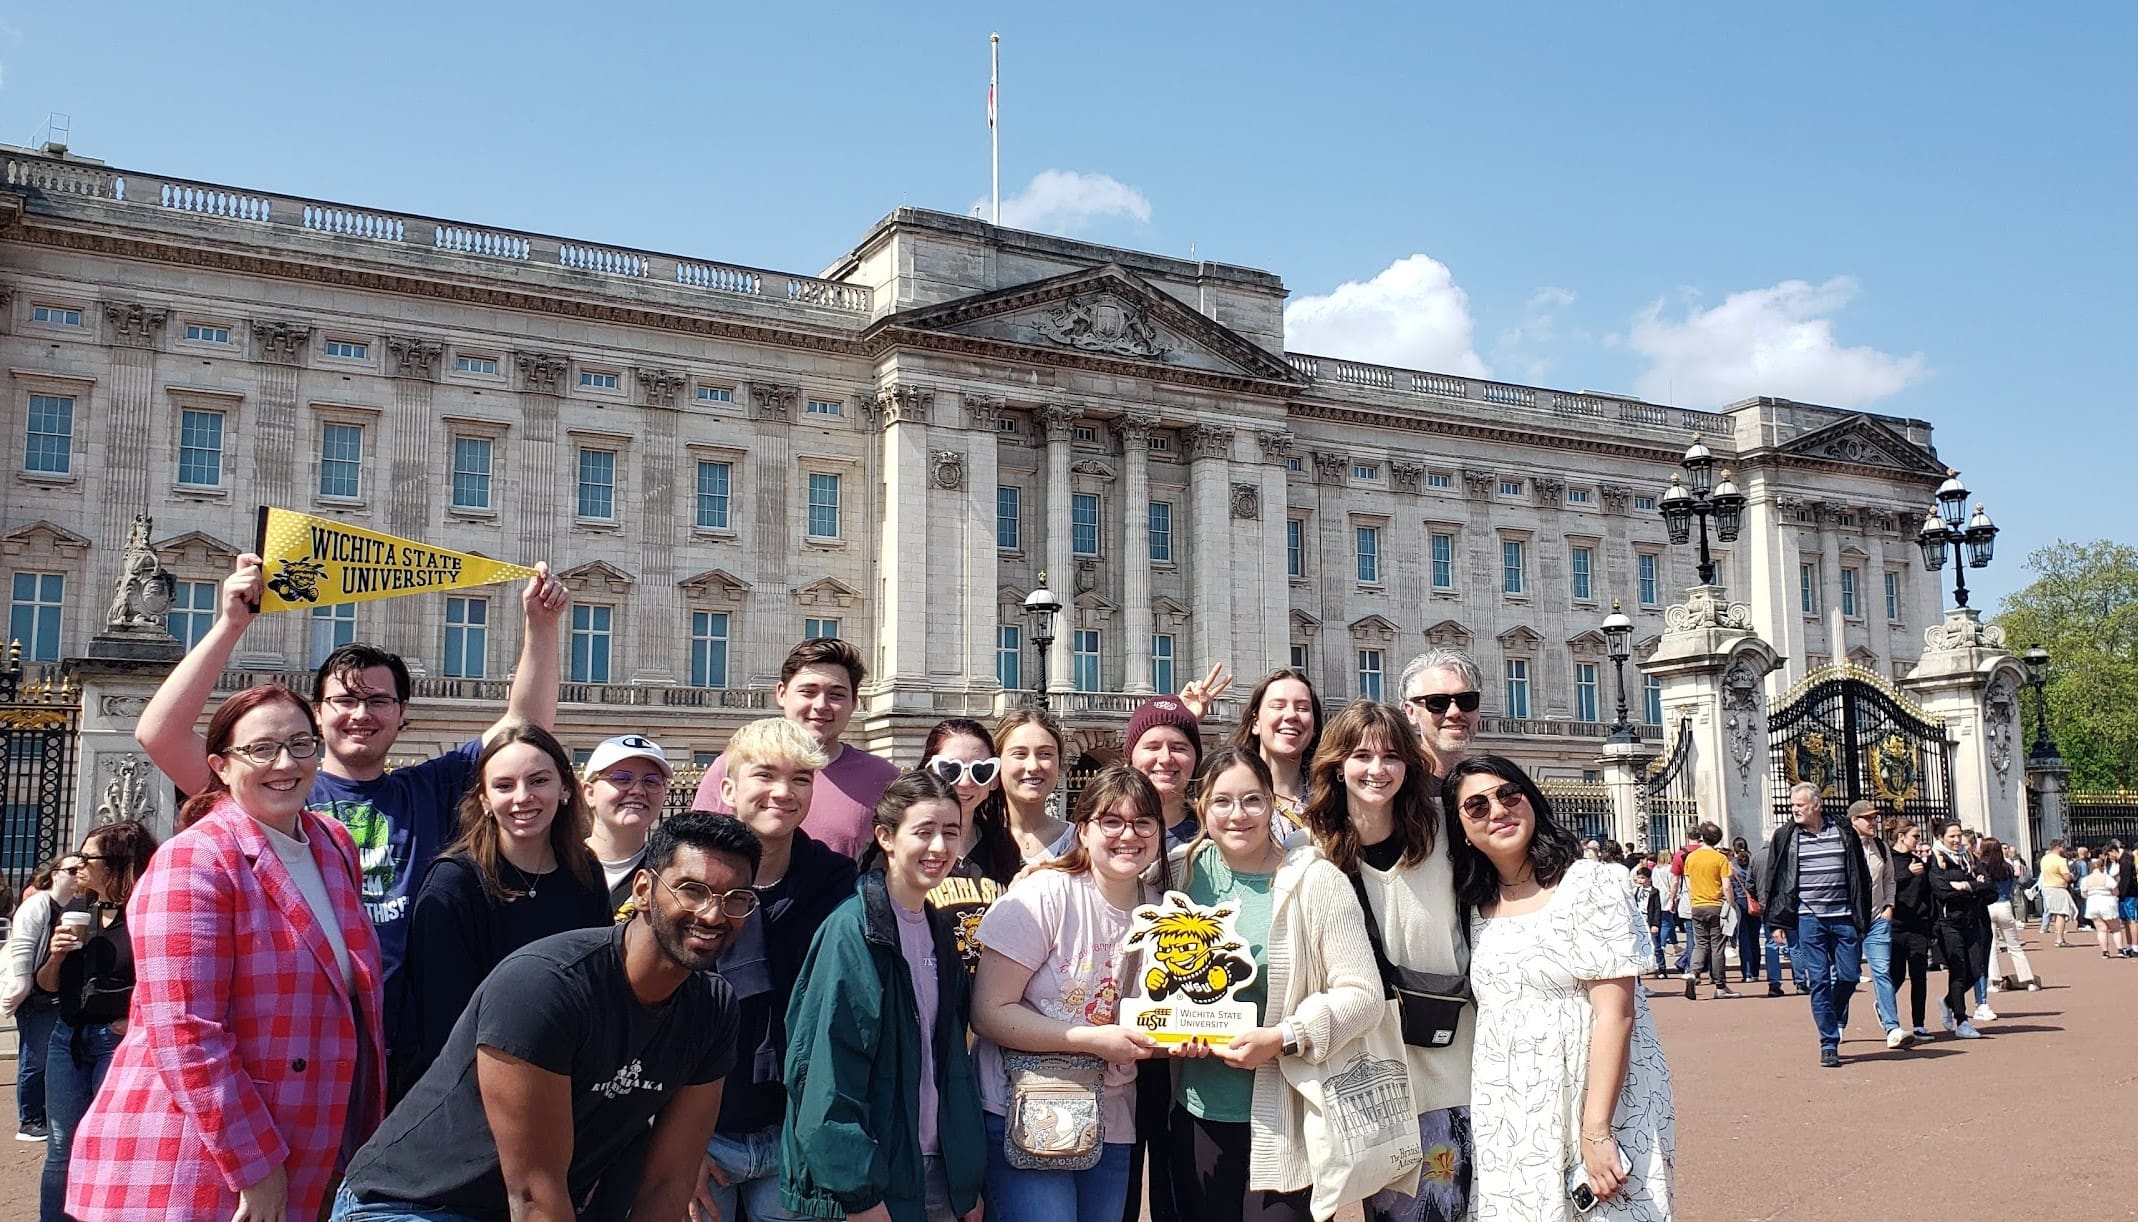 Faculty and students stand in front of Buckingham Palace holding Wichita State and WuShock signs.